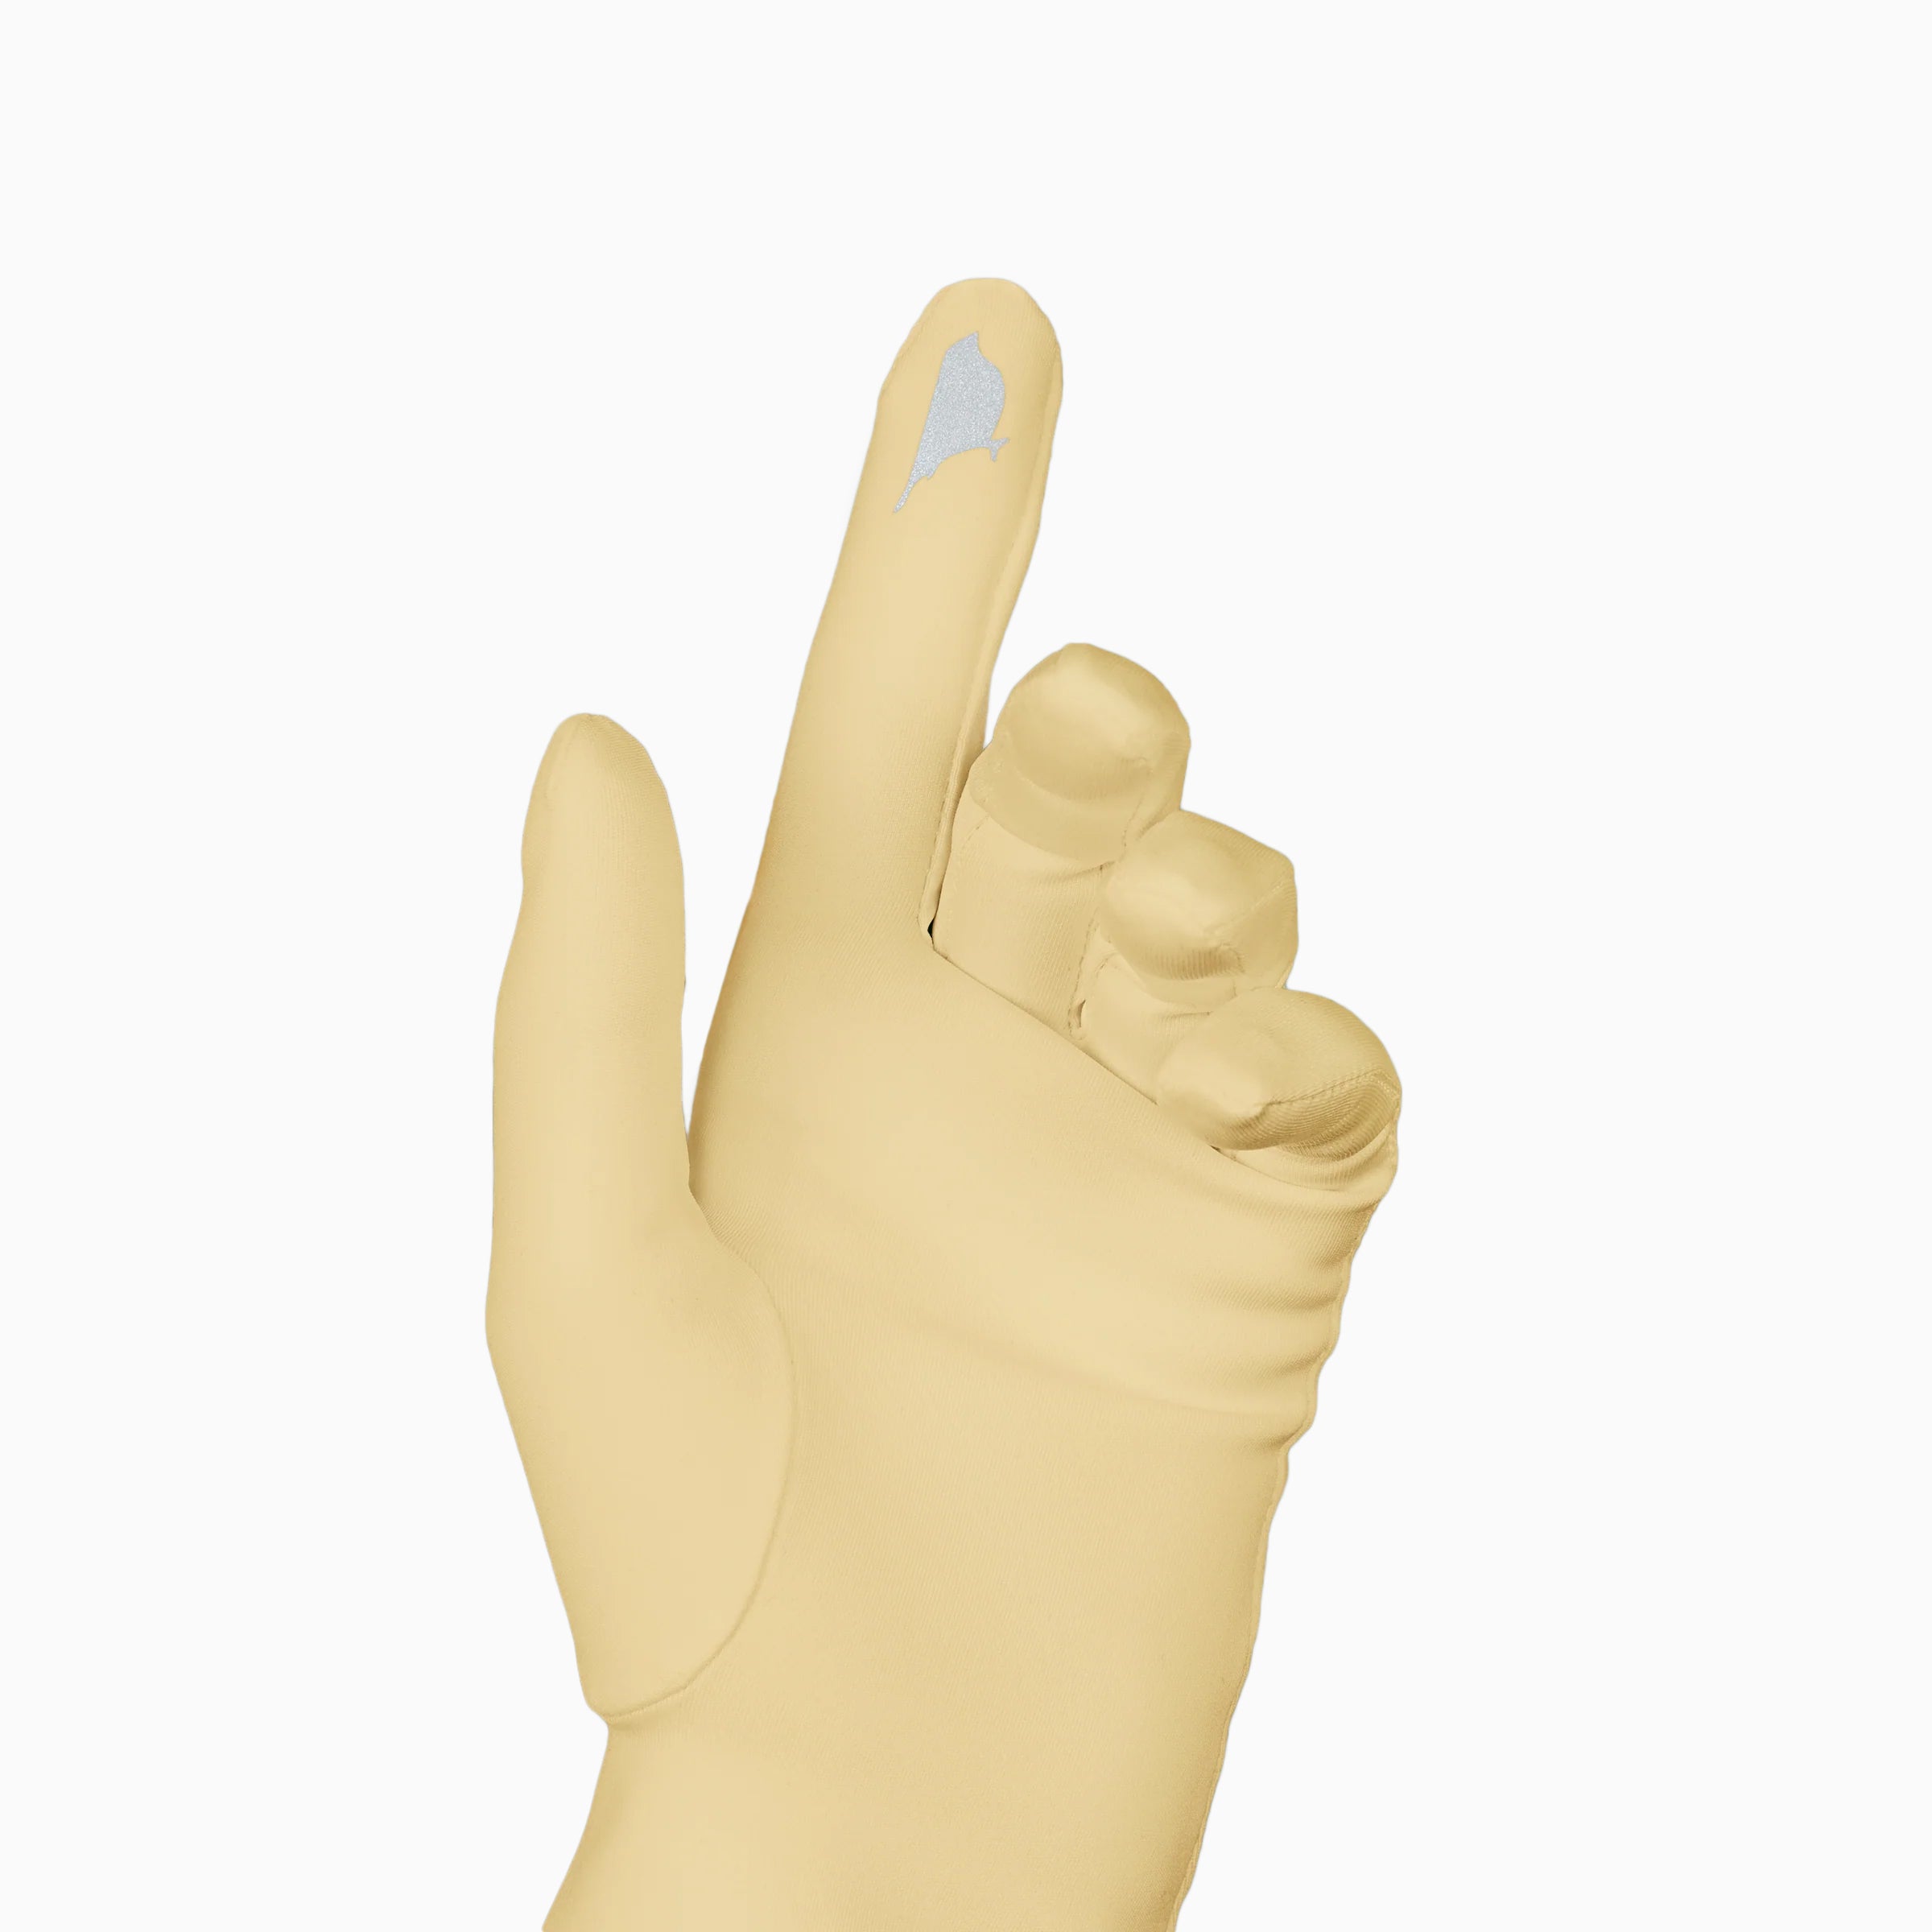 THE JILL glove with technology touchscreen index finger.